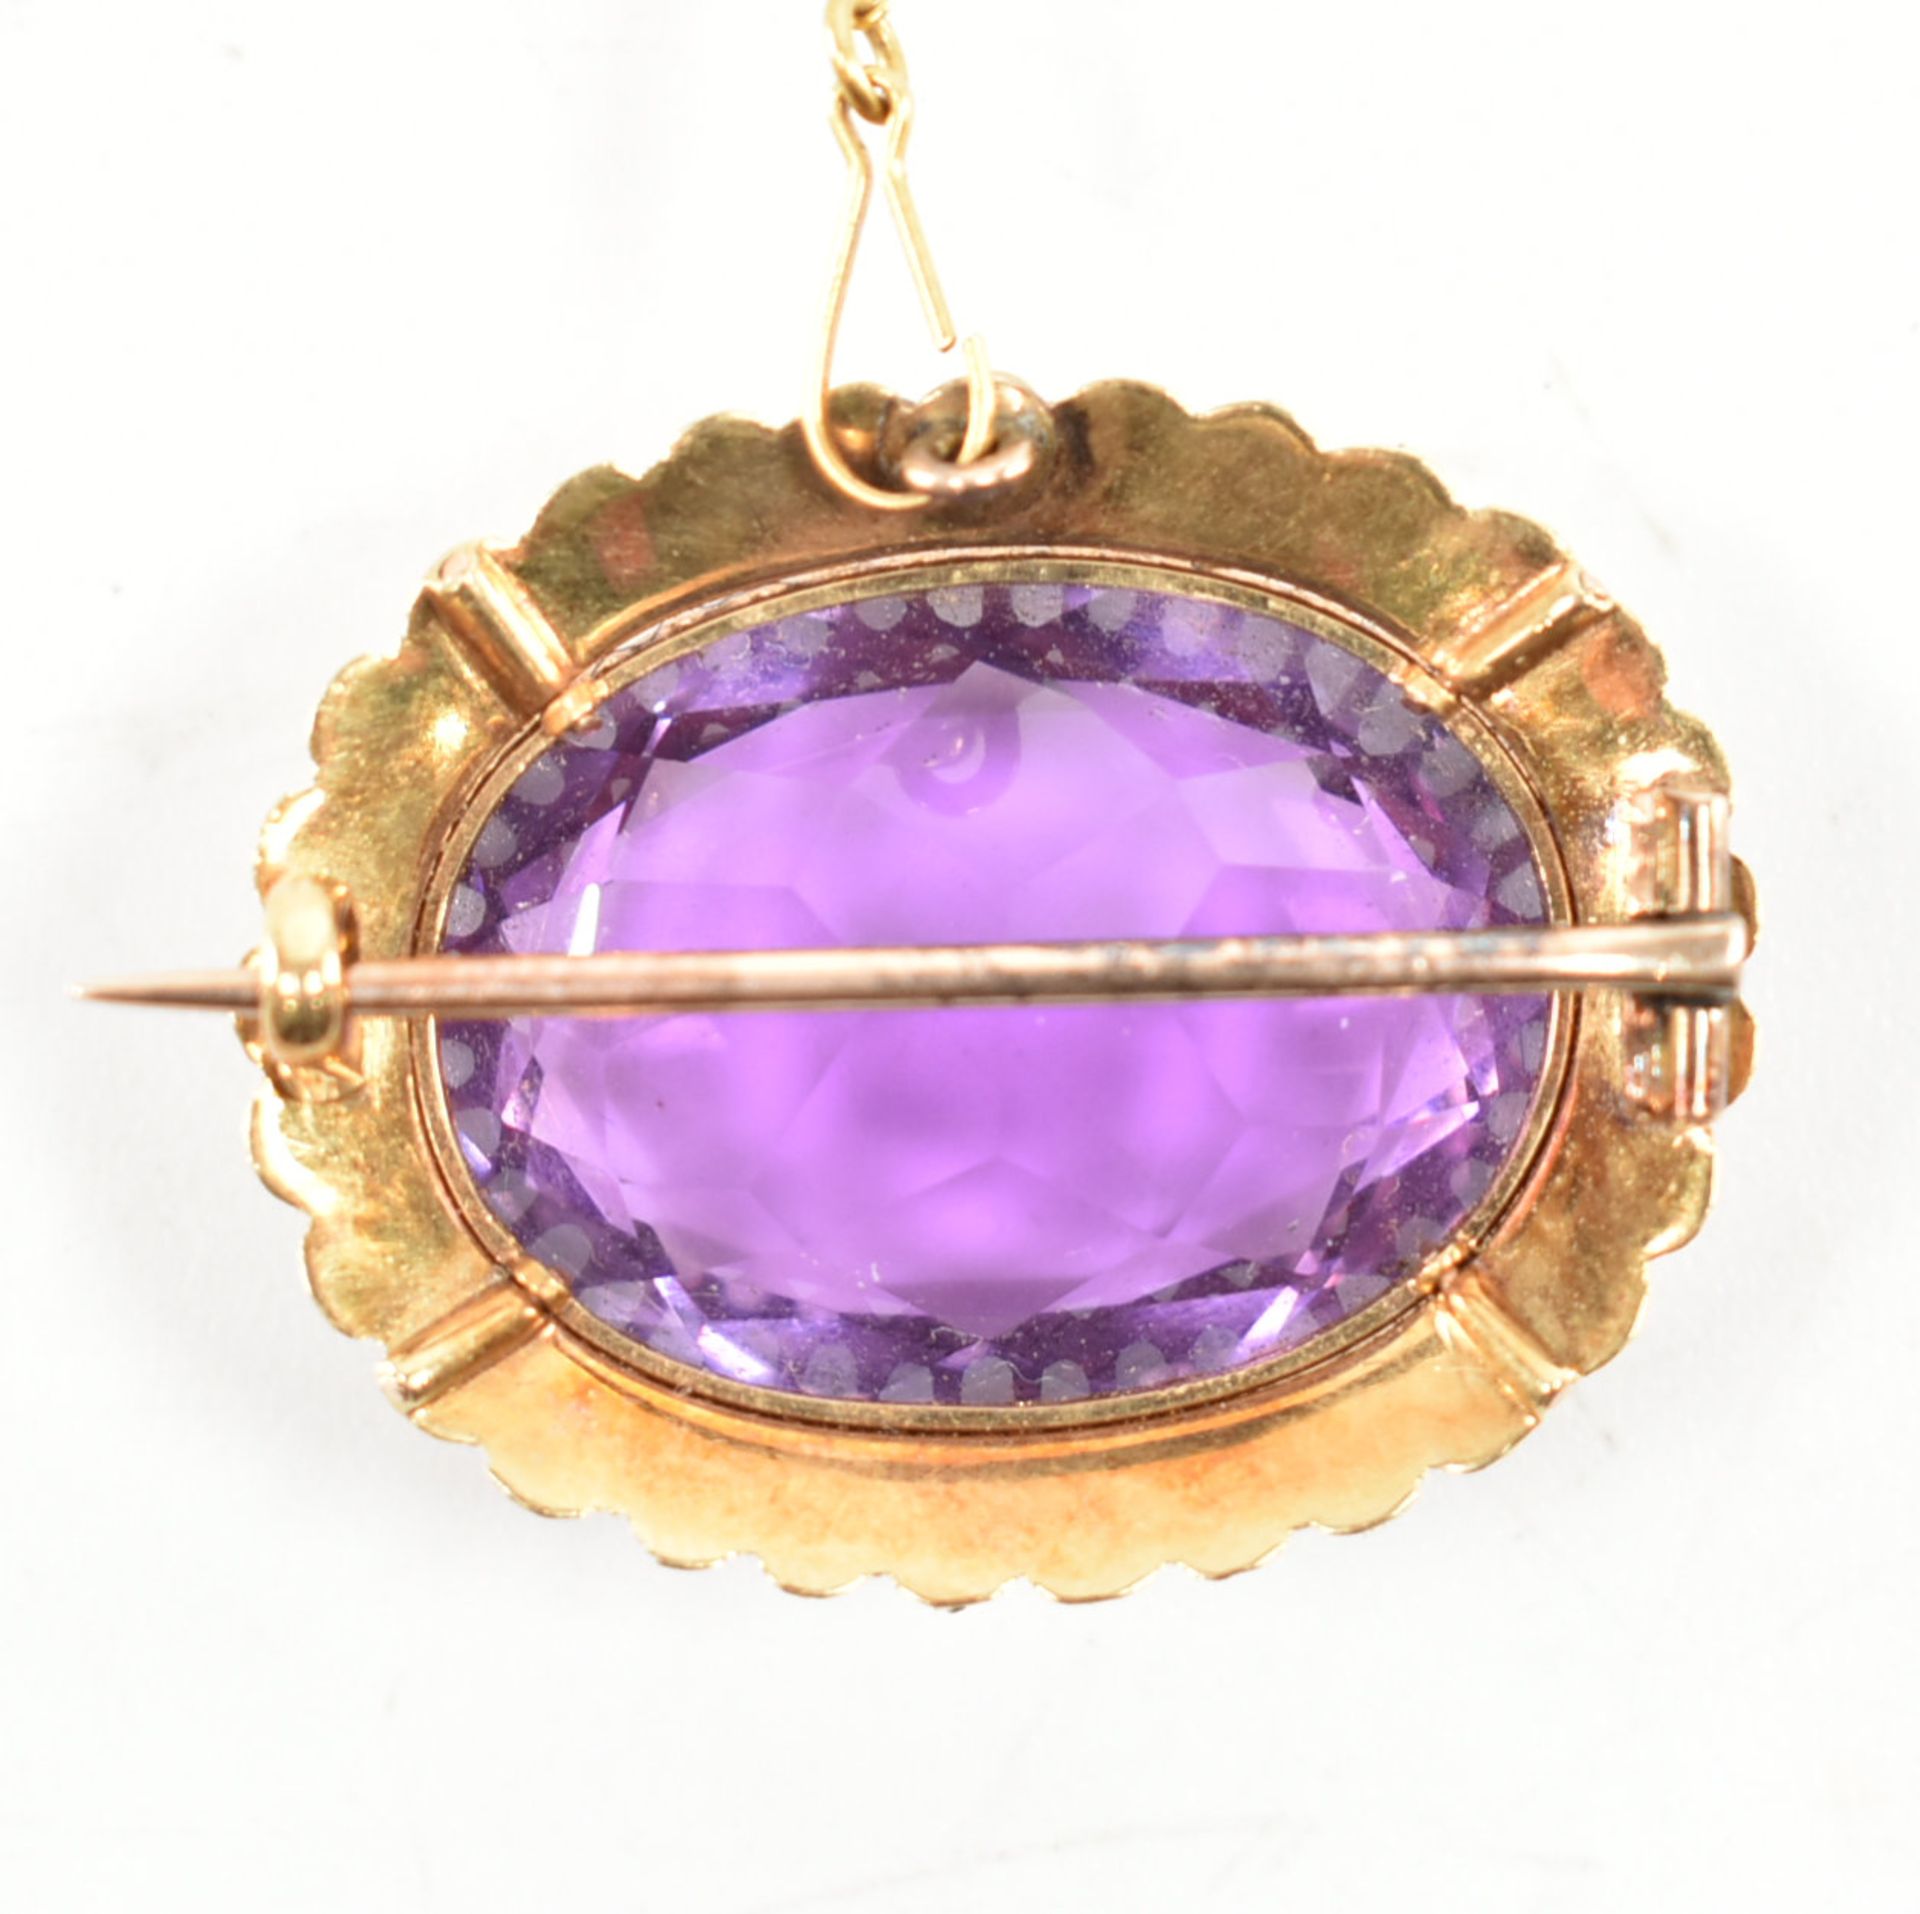 GOLD AMETHYST & SEED PEARL BROOCH PIN - Image 4 of 6